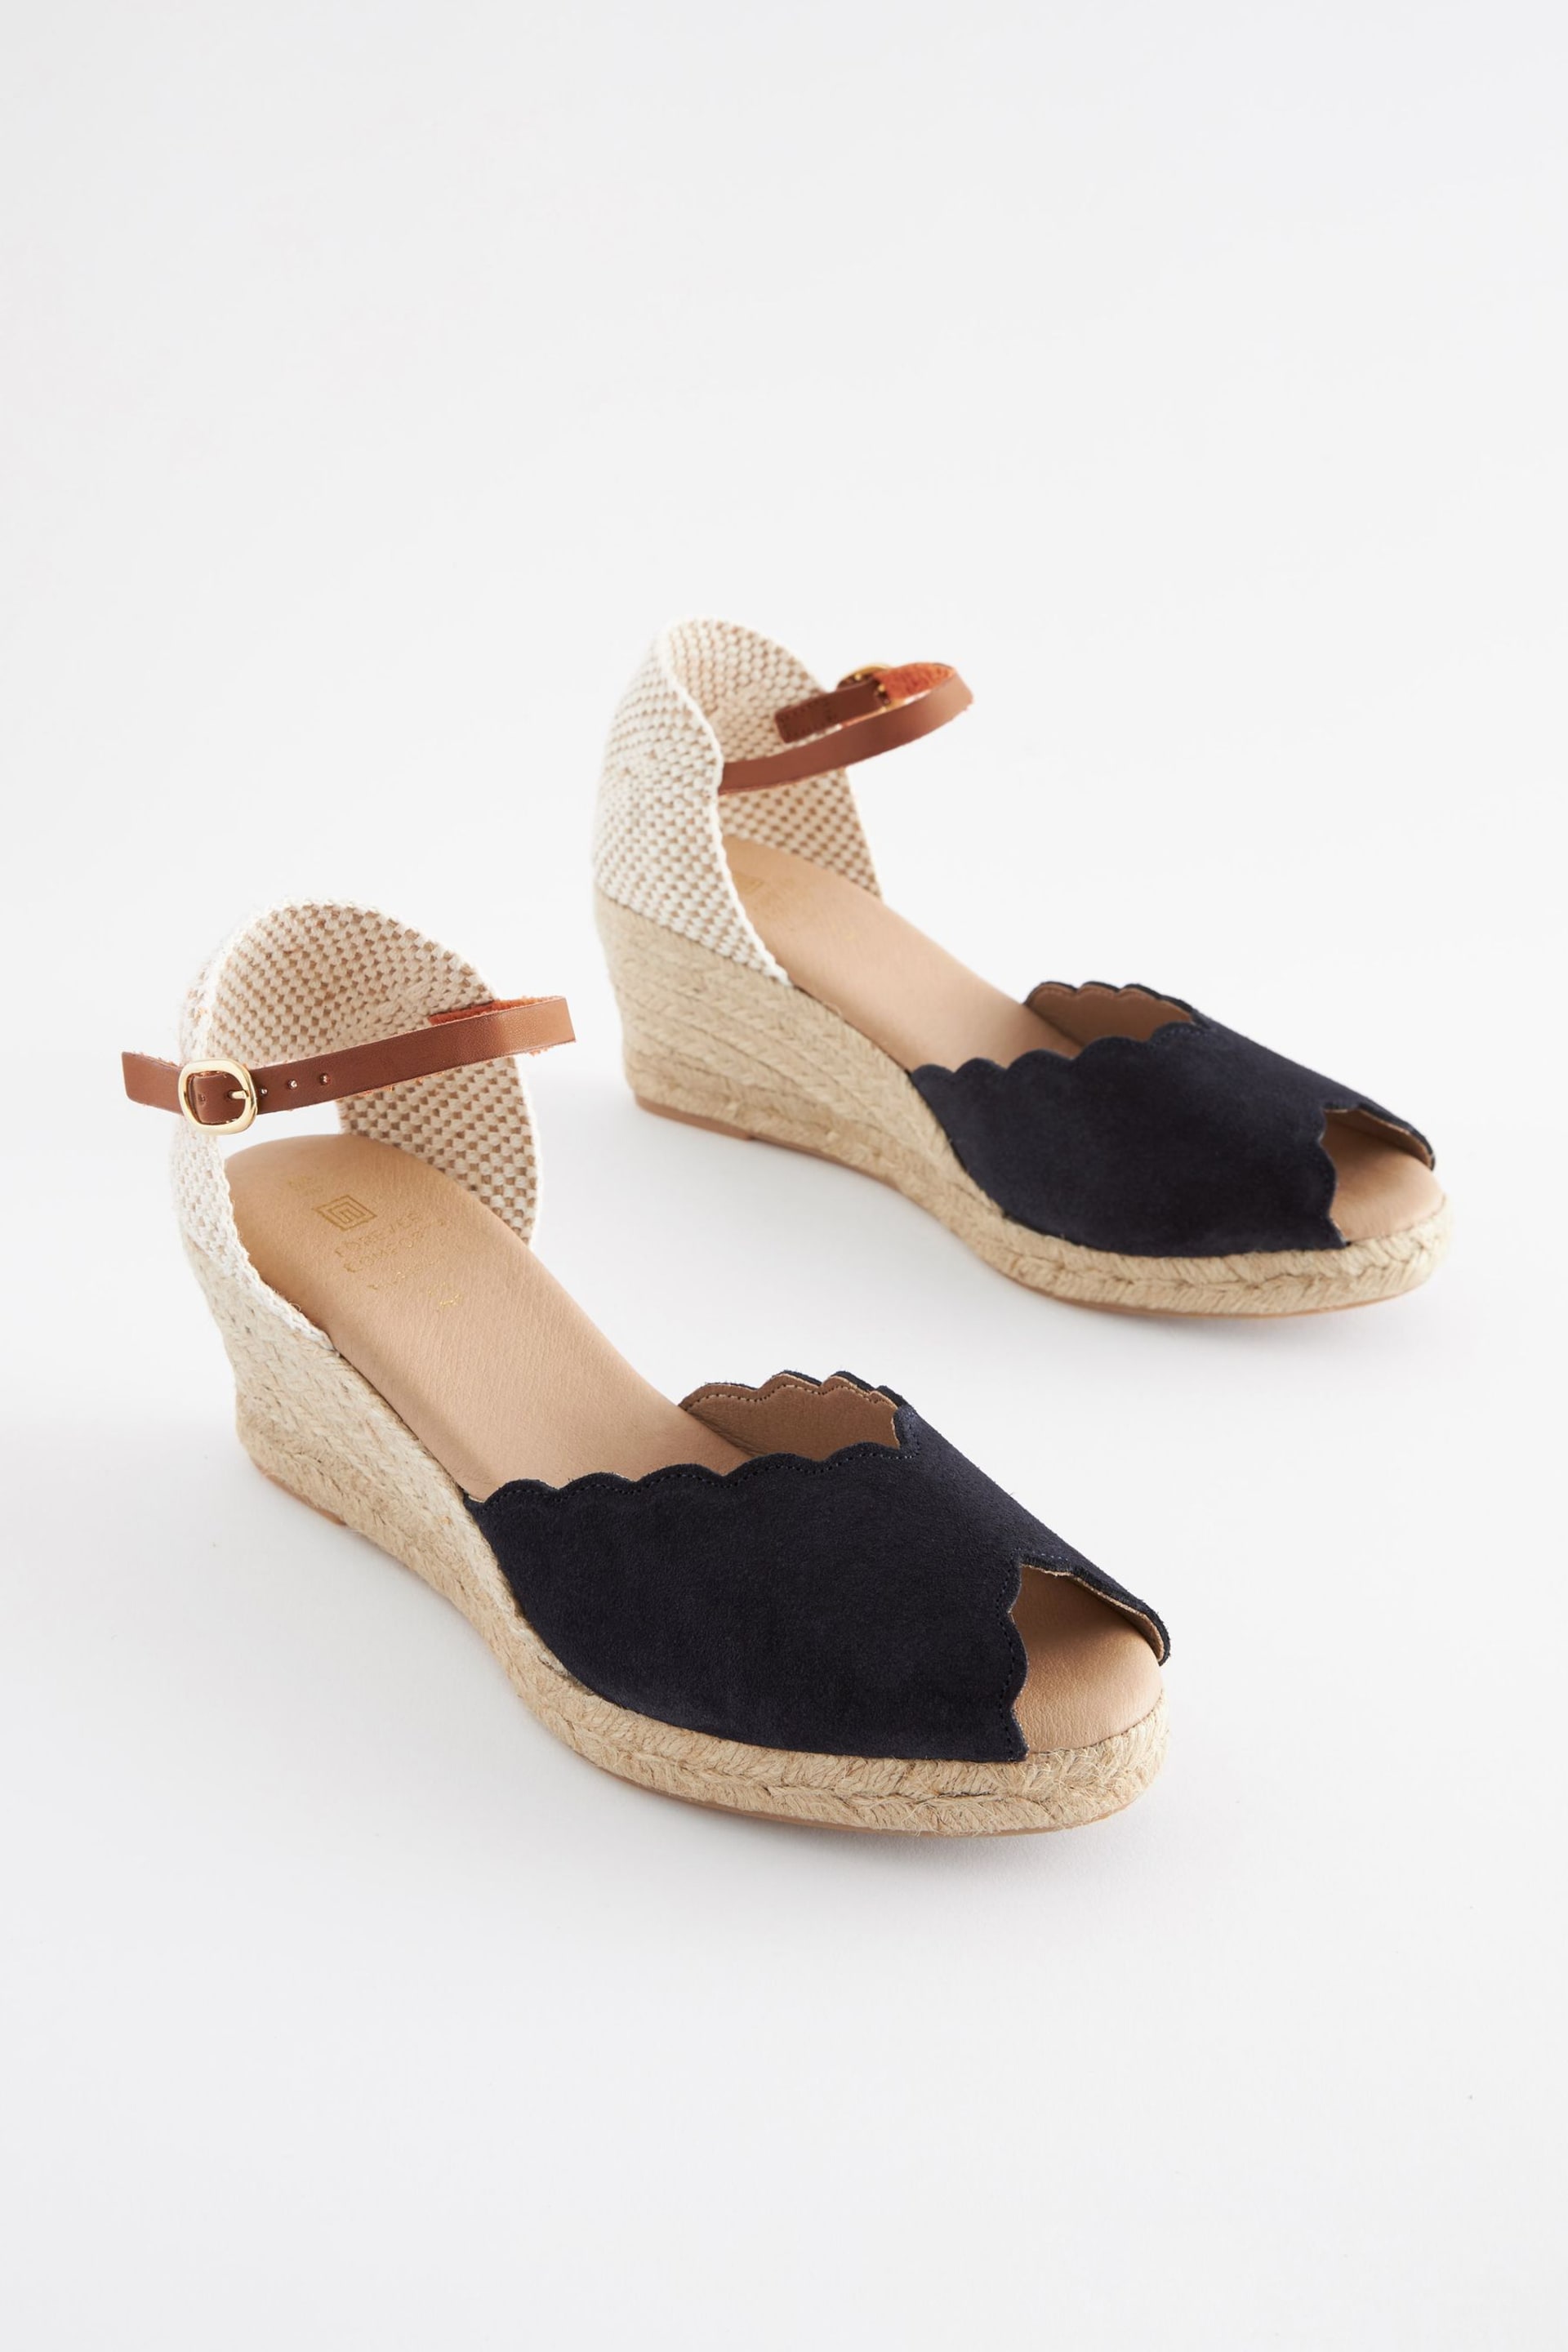 Navy Blue Scallop Peep Toe Wedges - Image 3 of 6